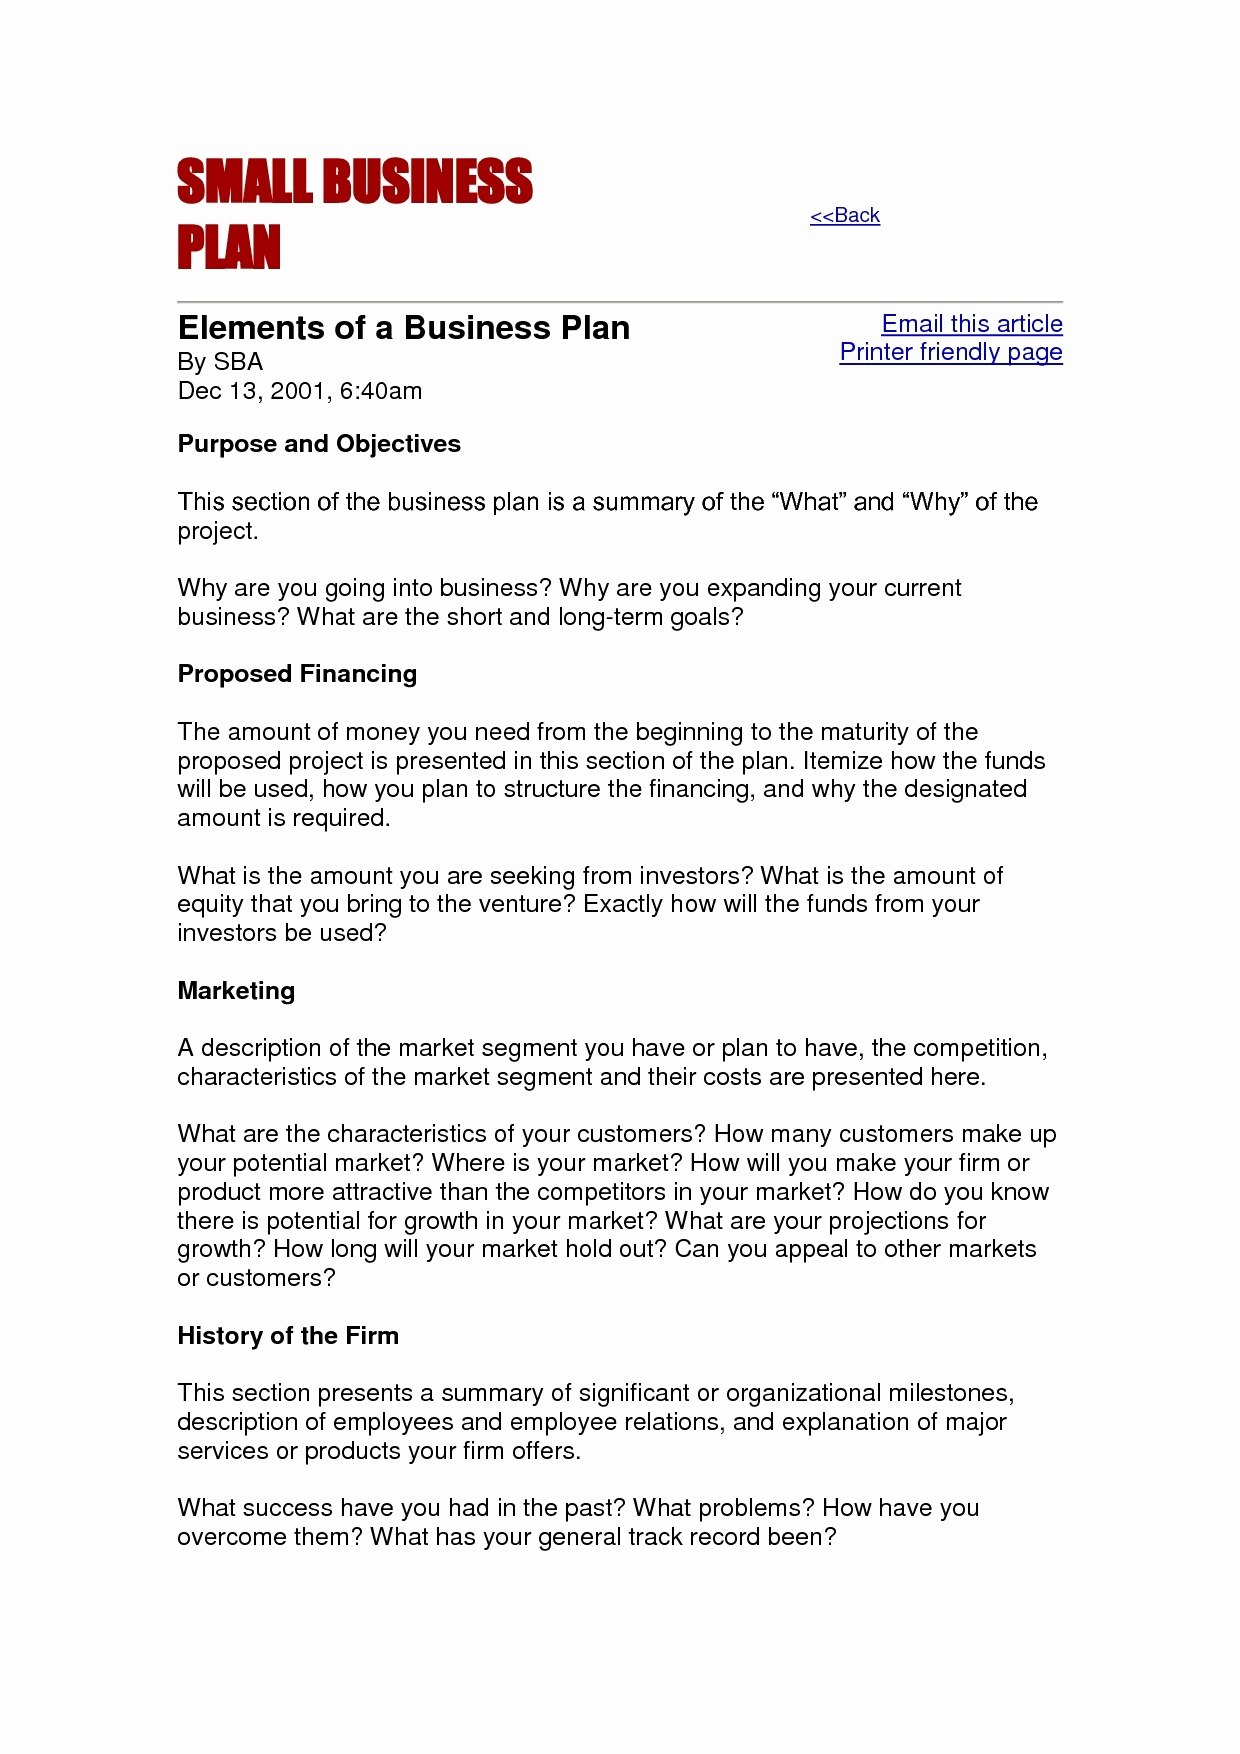 Real Estate Investment Partnership Business Plan Template intended for Real Estate Investment Partnership Business Plan Template